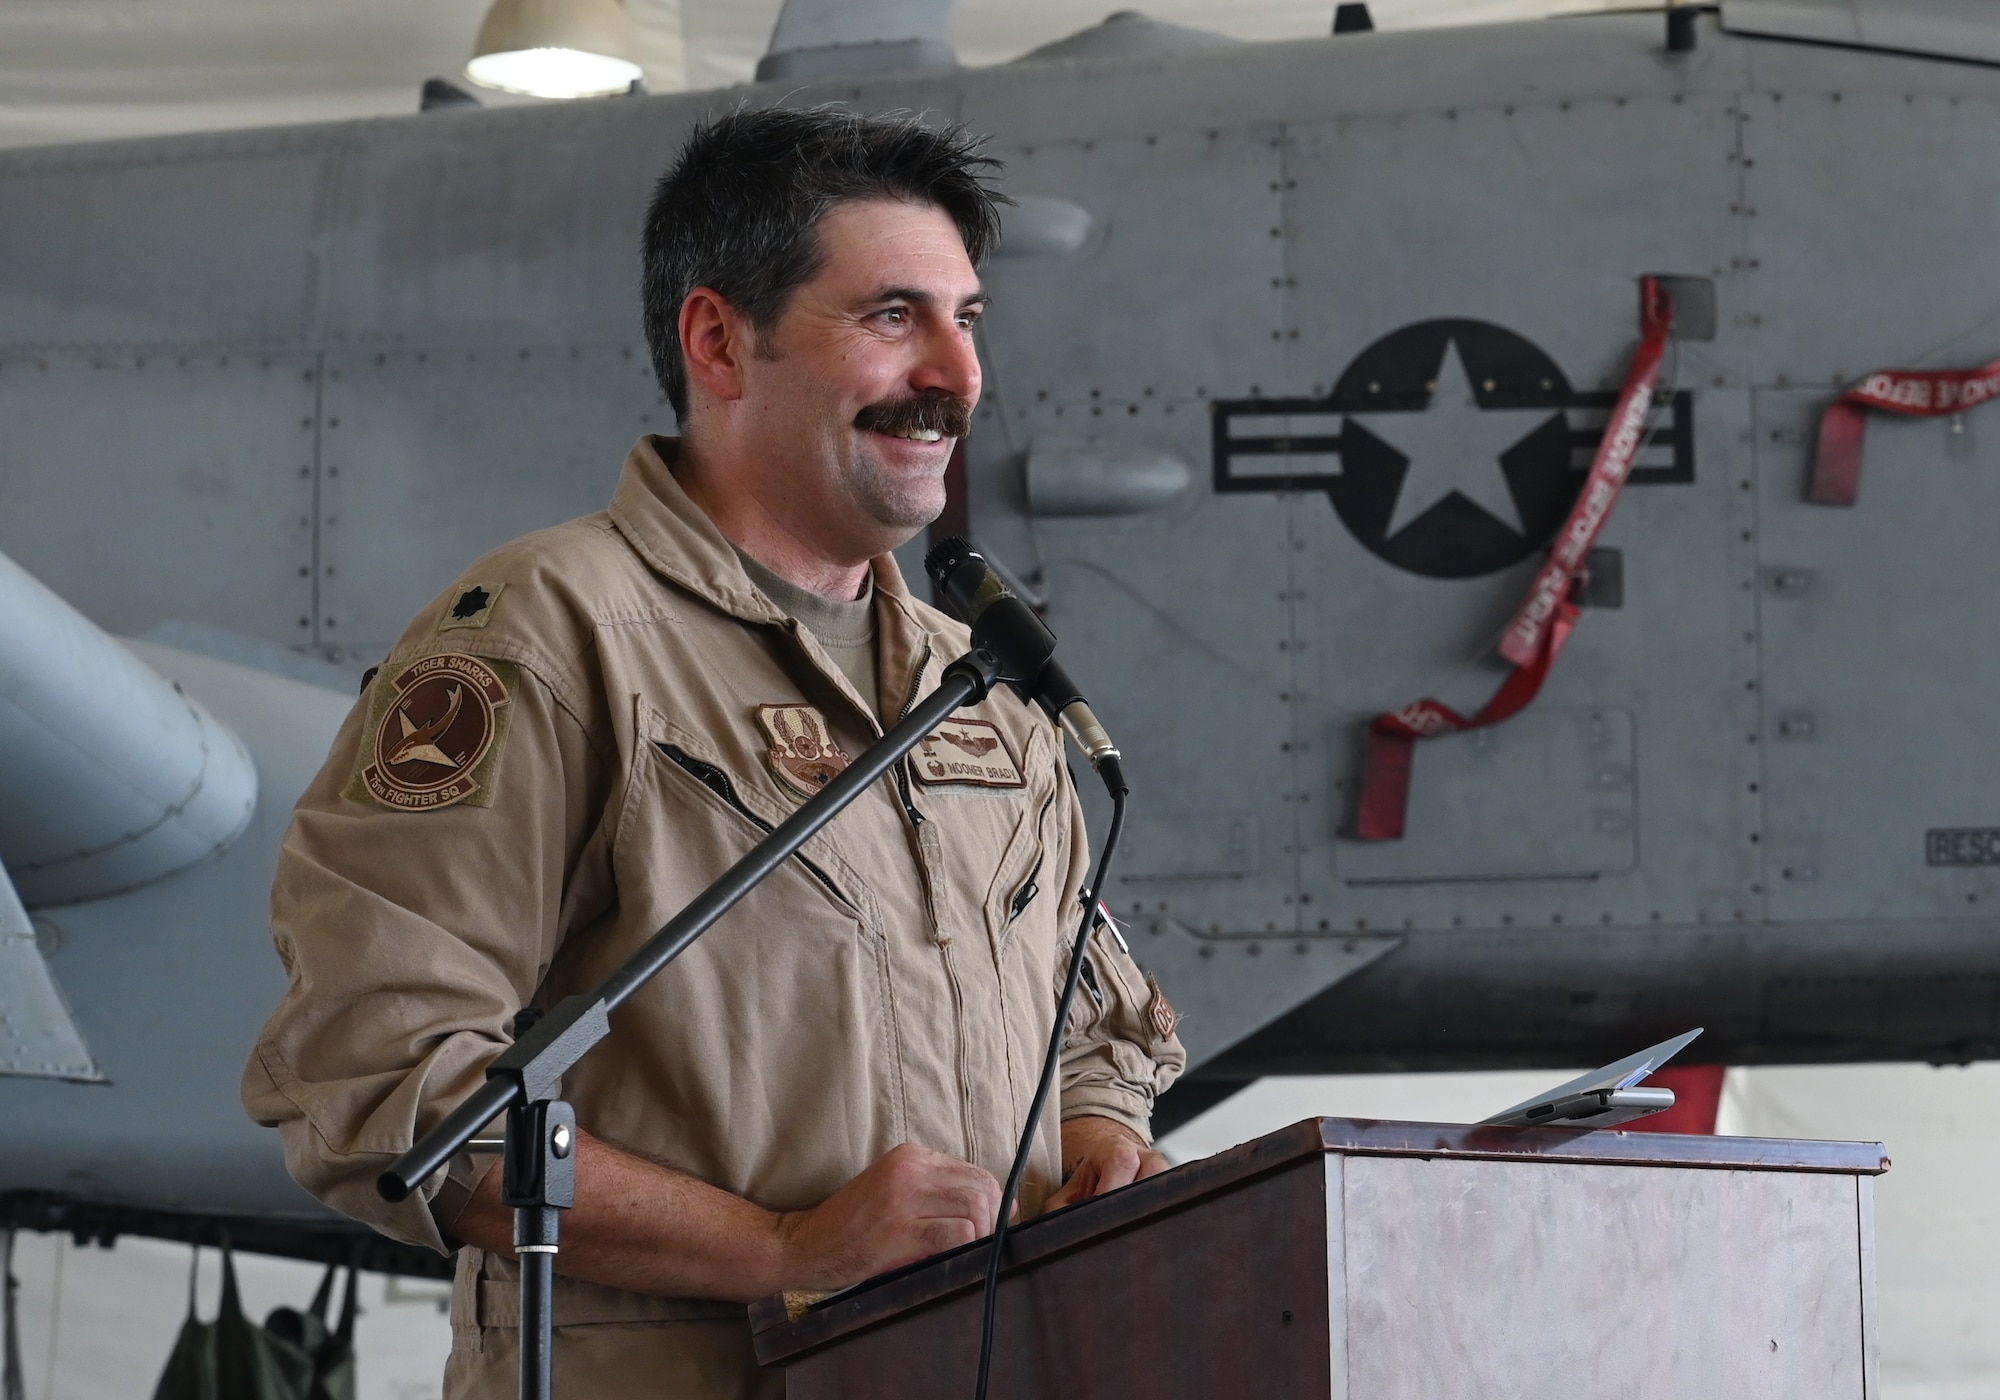 A photo of an Airman speaking at a podium.